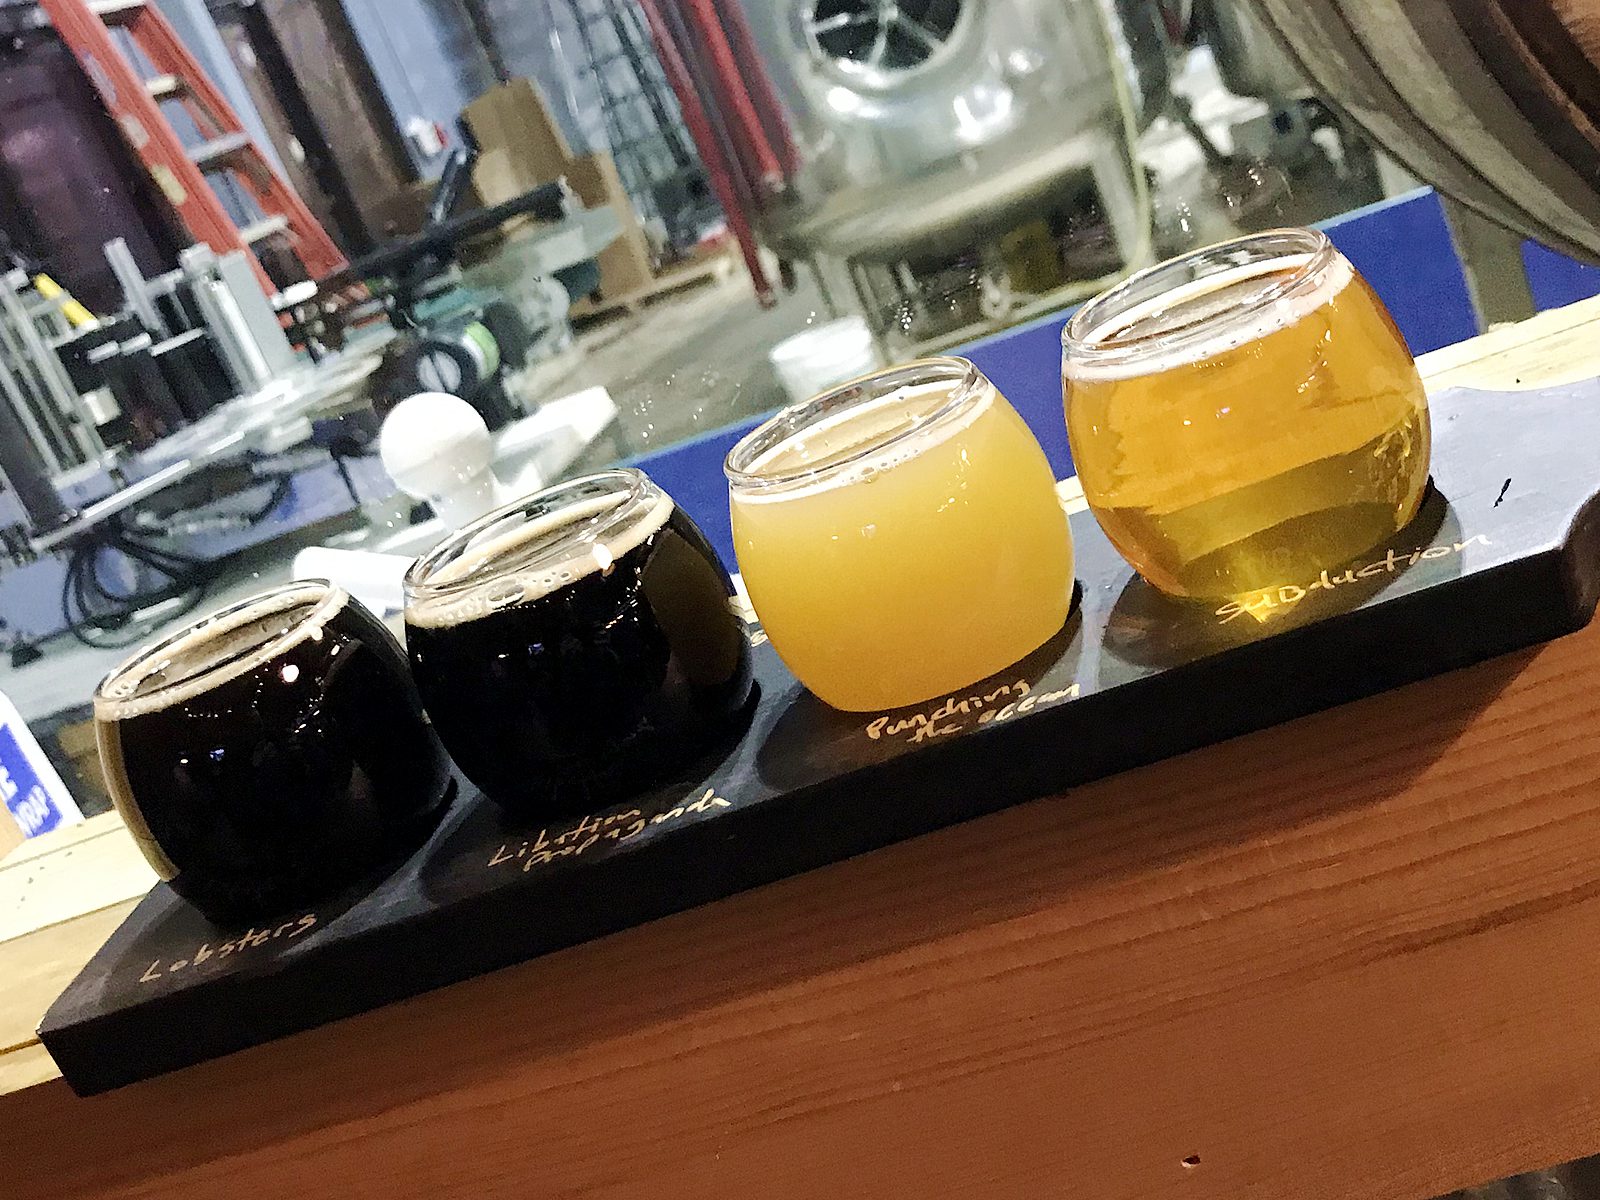 Outer Light Brewing Company: Punching the Ocean and flight